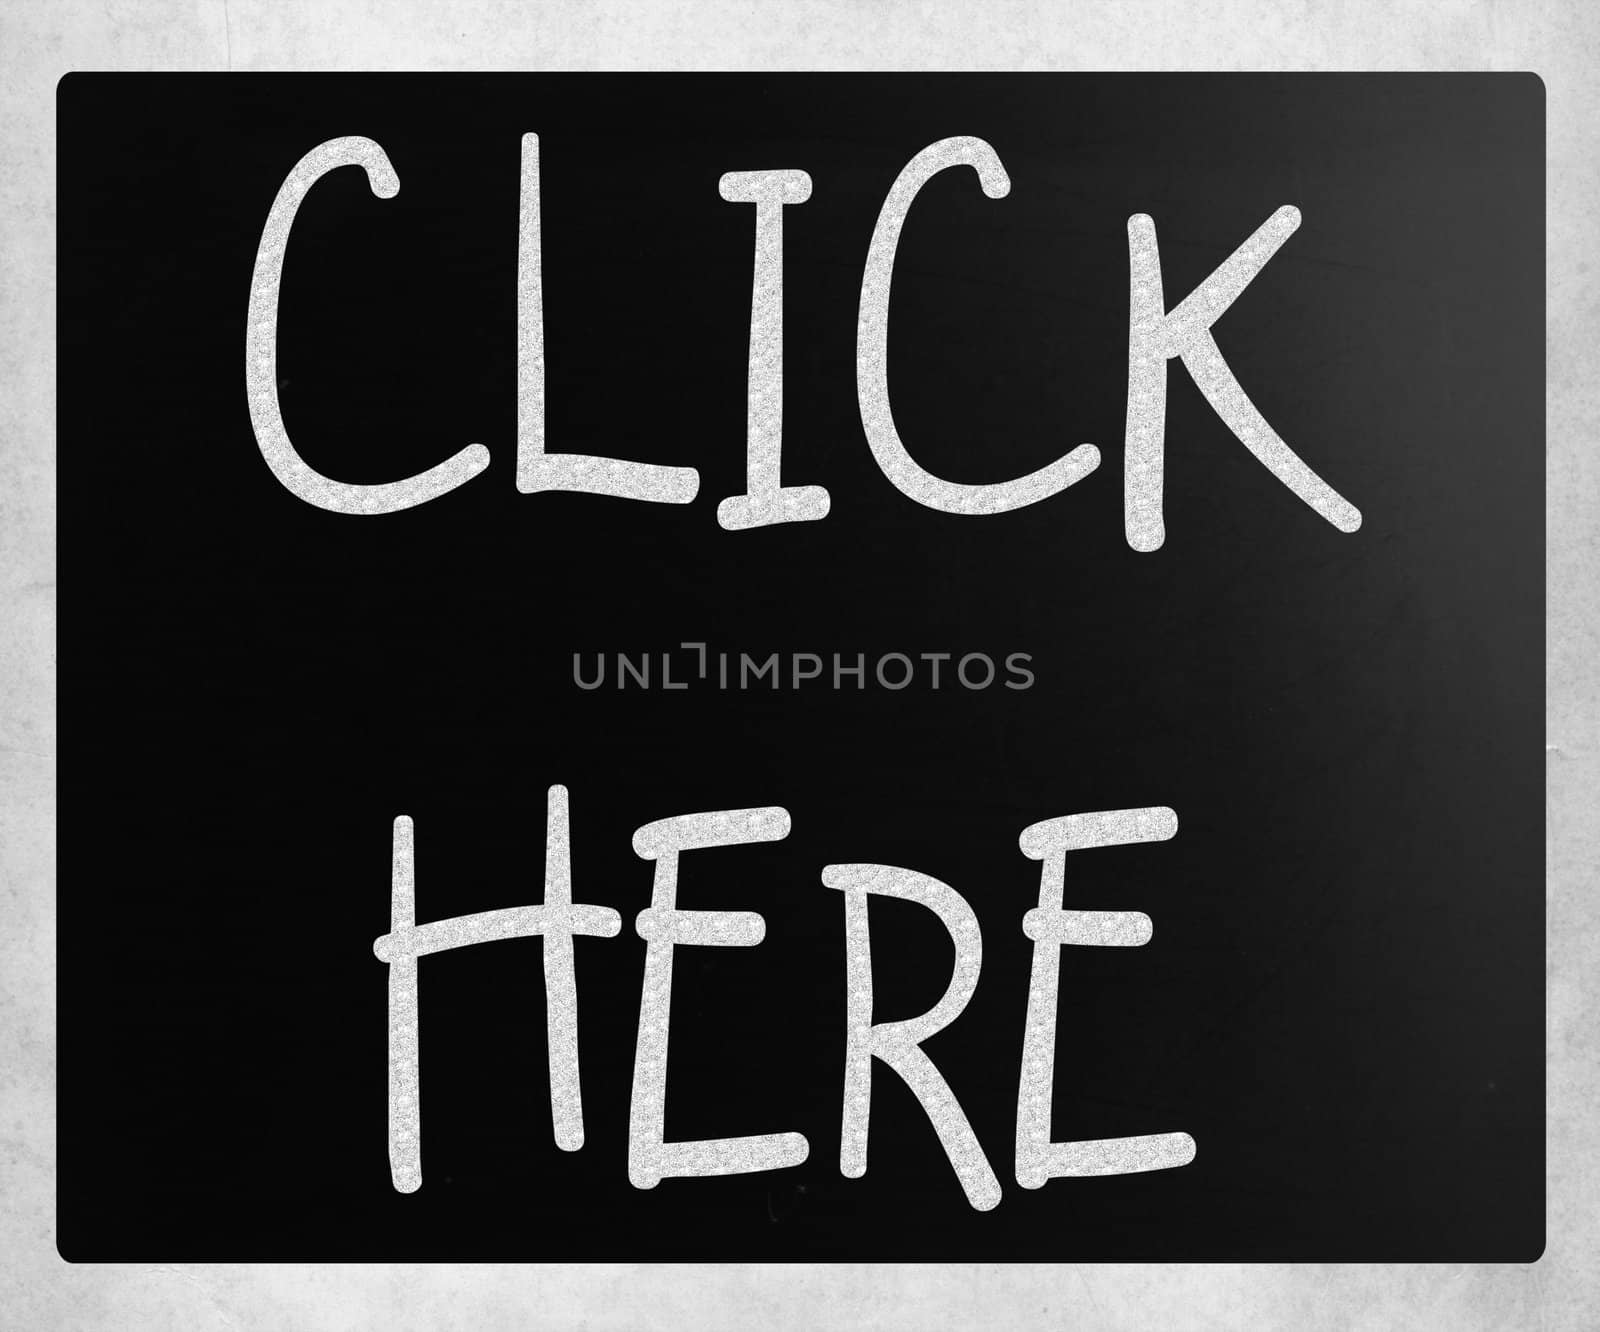 "Click here" handwritten with white chalk on a blackboard by nenov